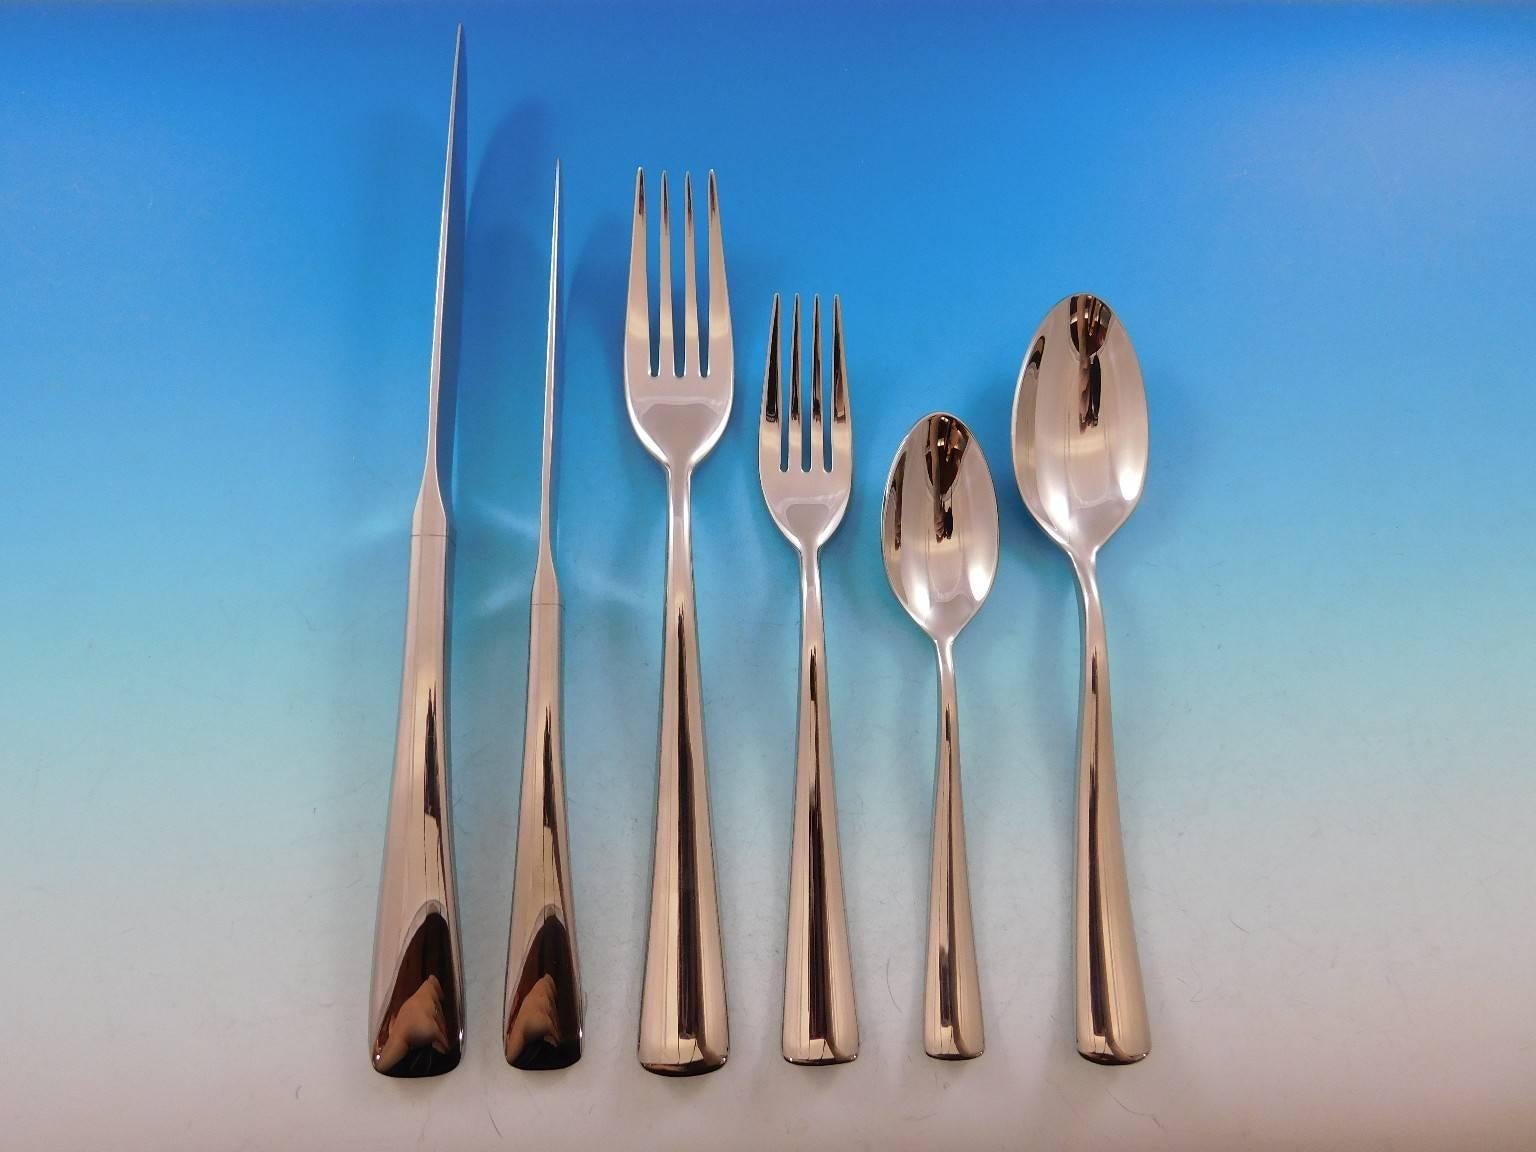 This brand new, still in the factory sleeves, Dinner Size stainless steel 83 piece flatware set for 12 in the pattern Elementaire by Christofle France includes:

    12 Dinner Size Knives, 9 1/2